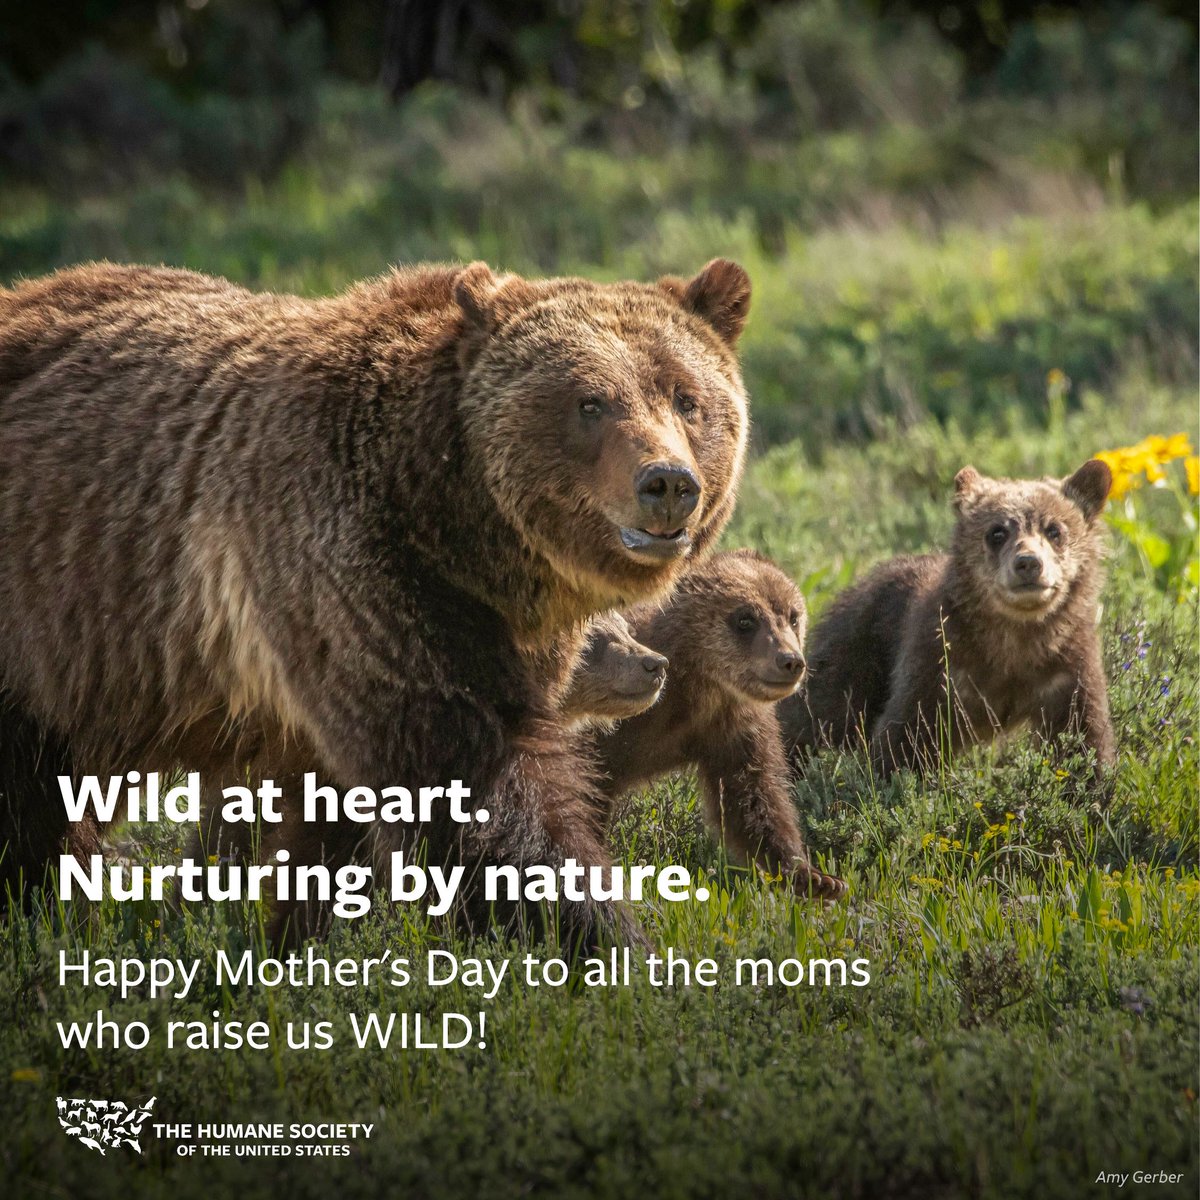 Happy Mother's Day to all the moms who raised us WILD! 🐻💞